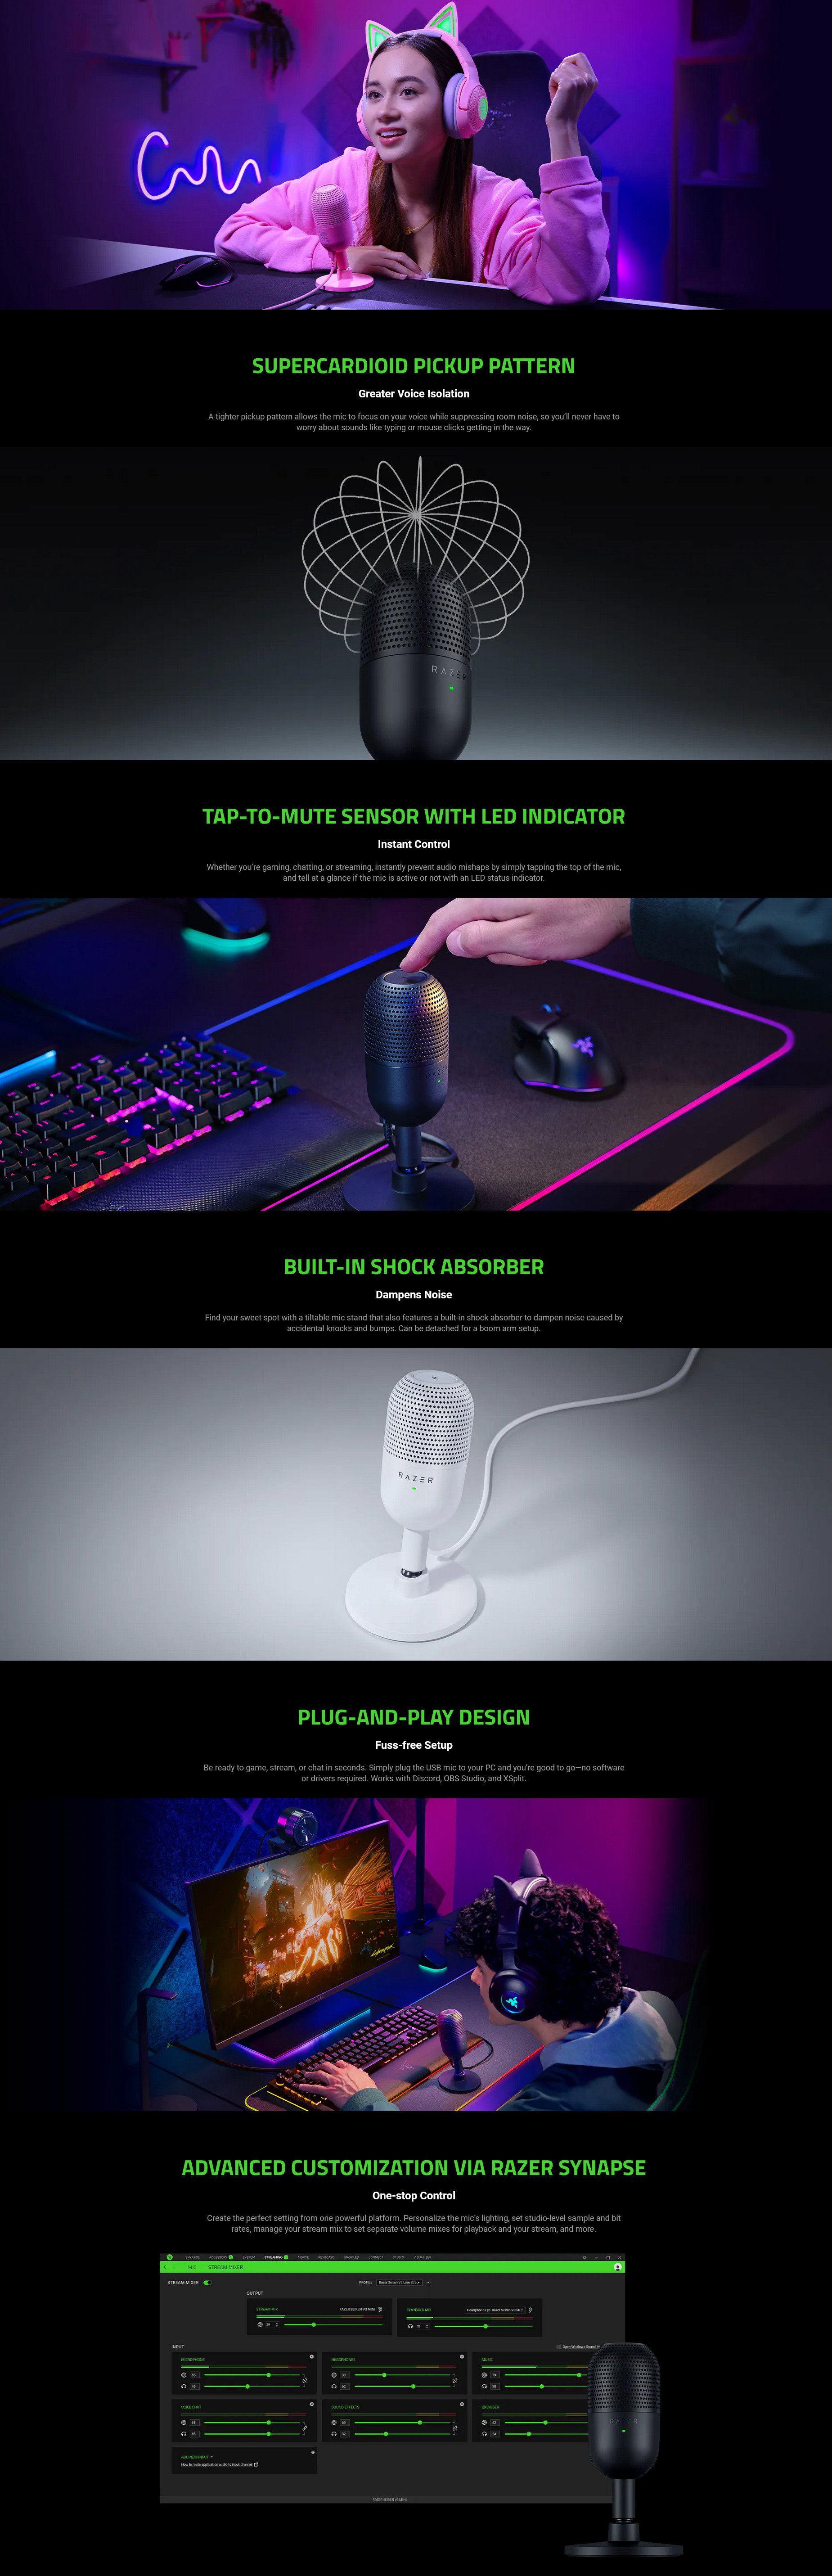 A large marketing image providing additional information about the product Razer Seiren V3 Mini - Ultra-Compact USB Microphone (Black) - Additional alt info not provided